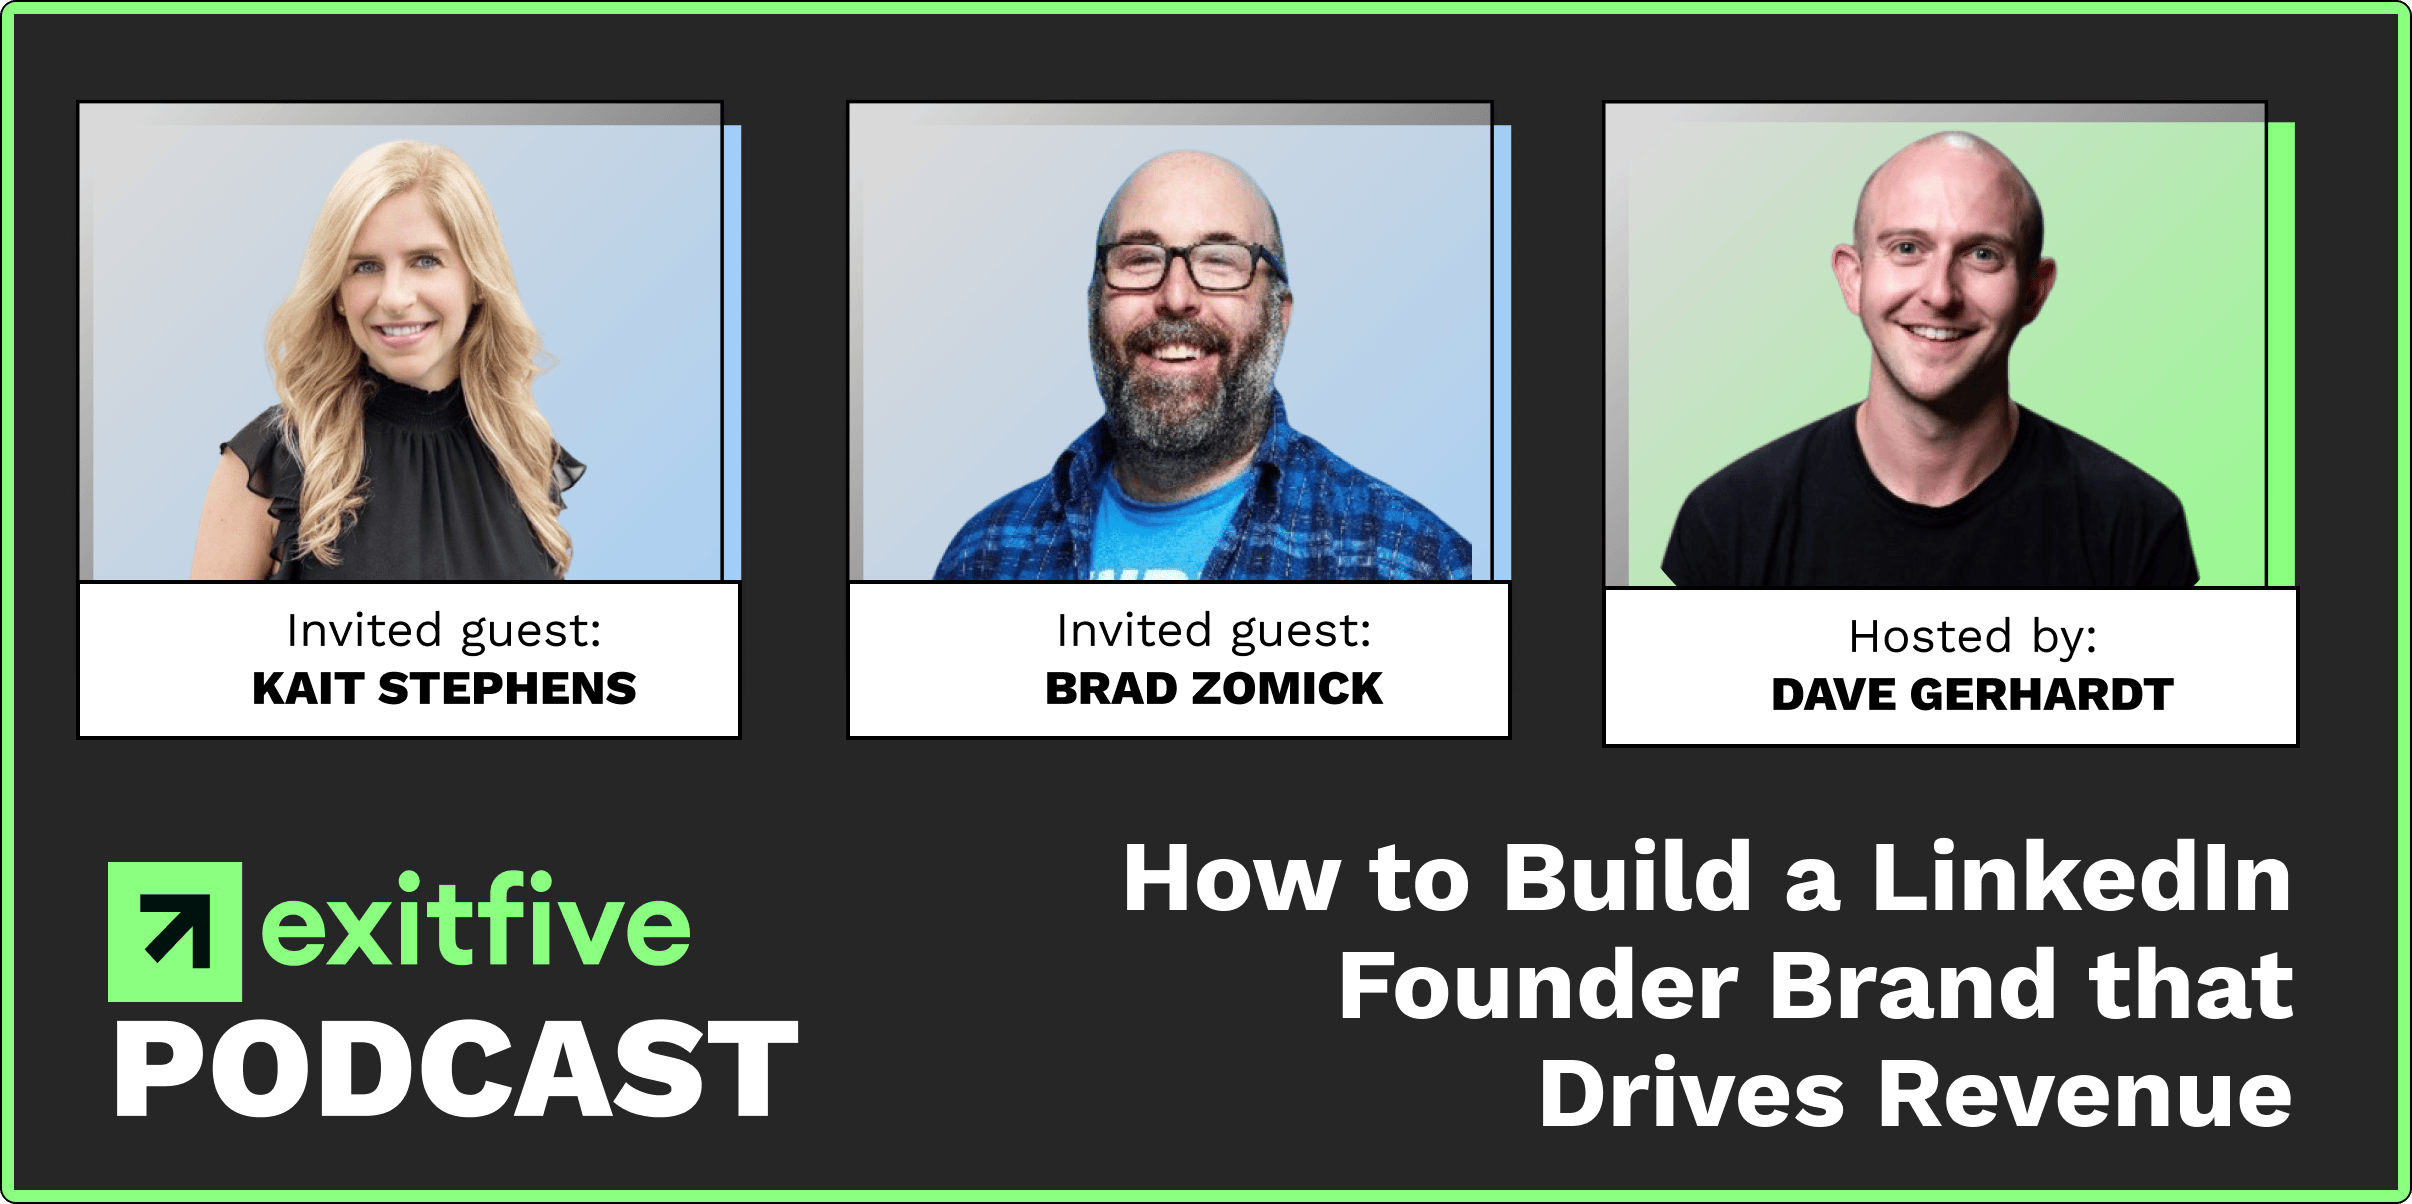 LinkedIn | How to Build a LinkedIn Founder Brand that Drives Revenue with Kait Stephens and Brad Zomick